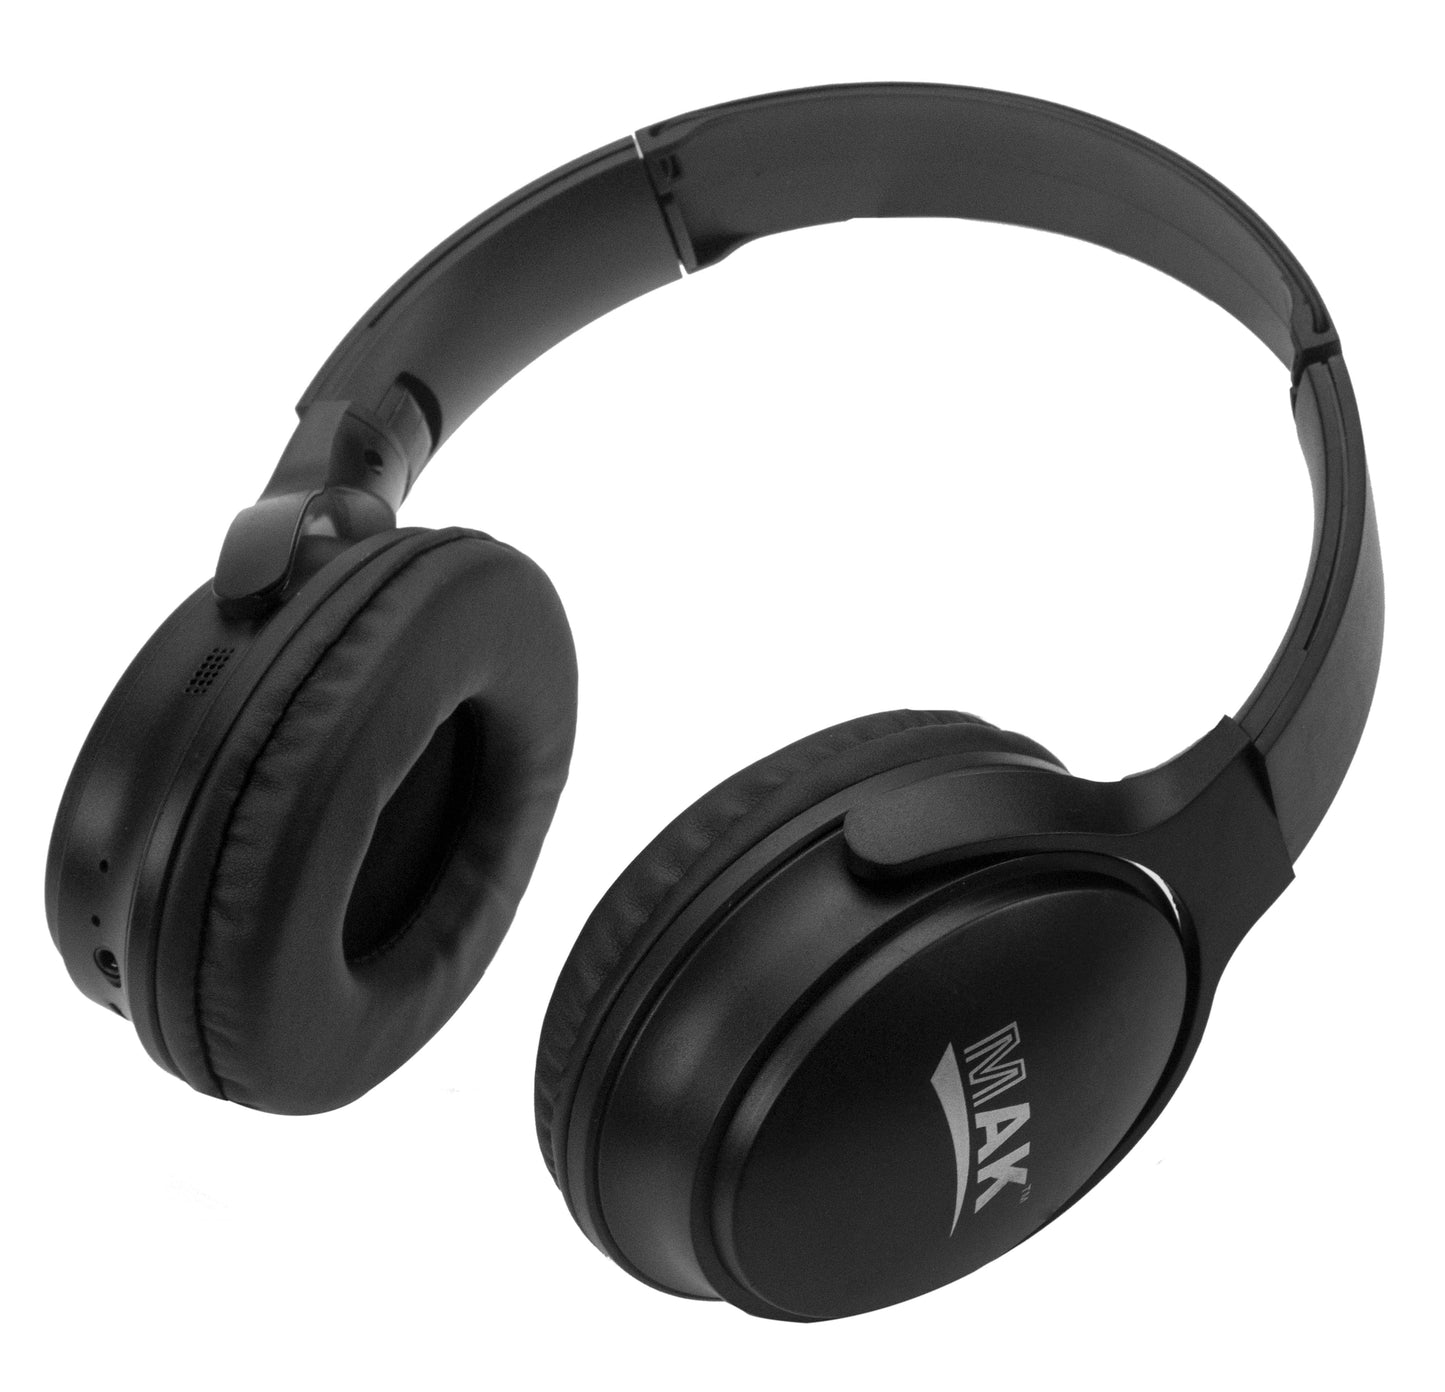 MK-210 Over Ear Bluetooth Headphones with Upto 8 Hours Playback, with Mic (Black)